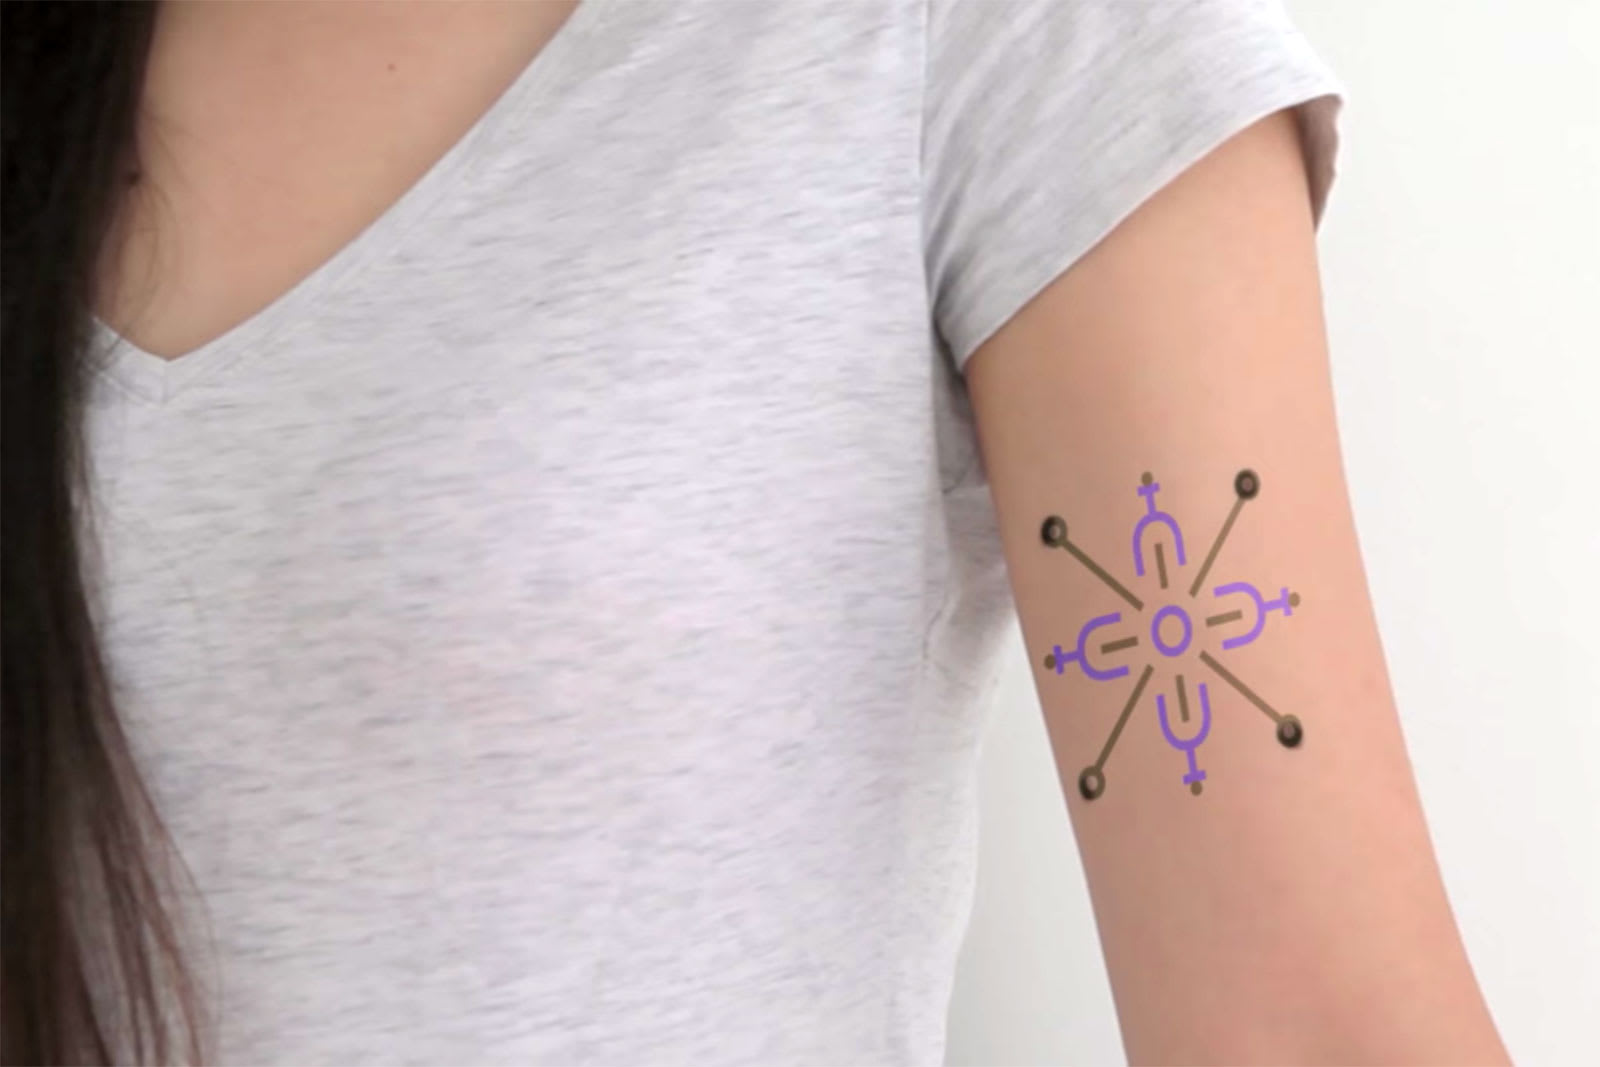 Smart tattoos turn your skin into a health tracker